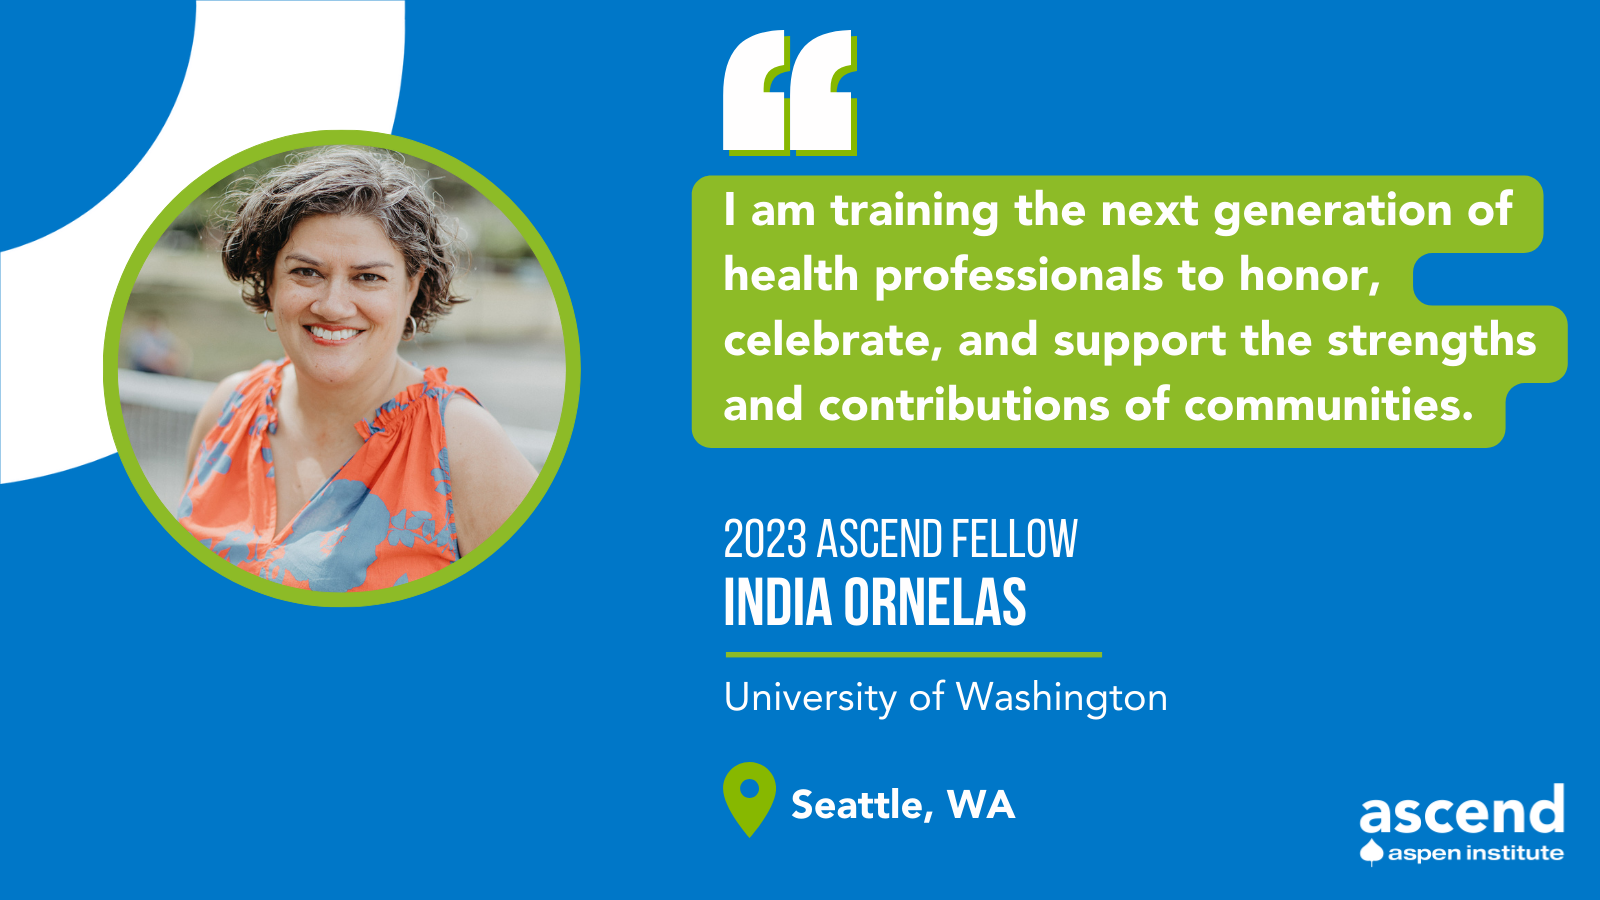 "I am training the next generation of health professionals to honor, celebrate and support the strengths and contributions of communities." -India Ornelas